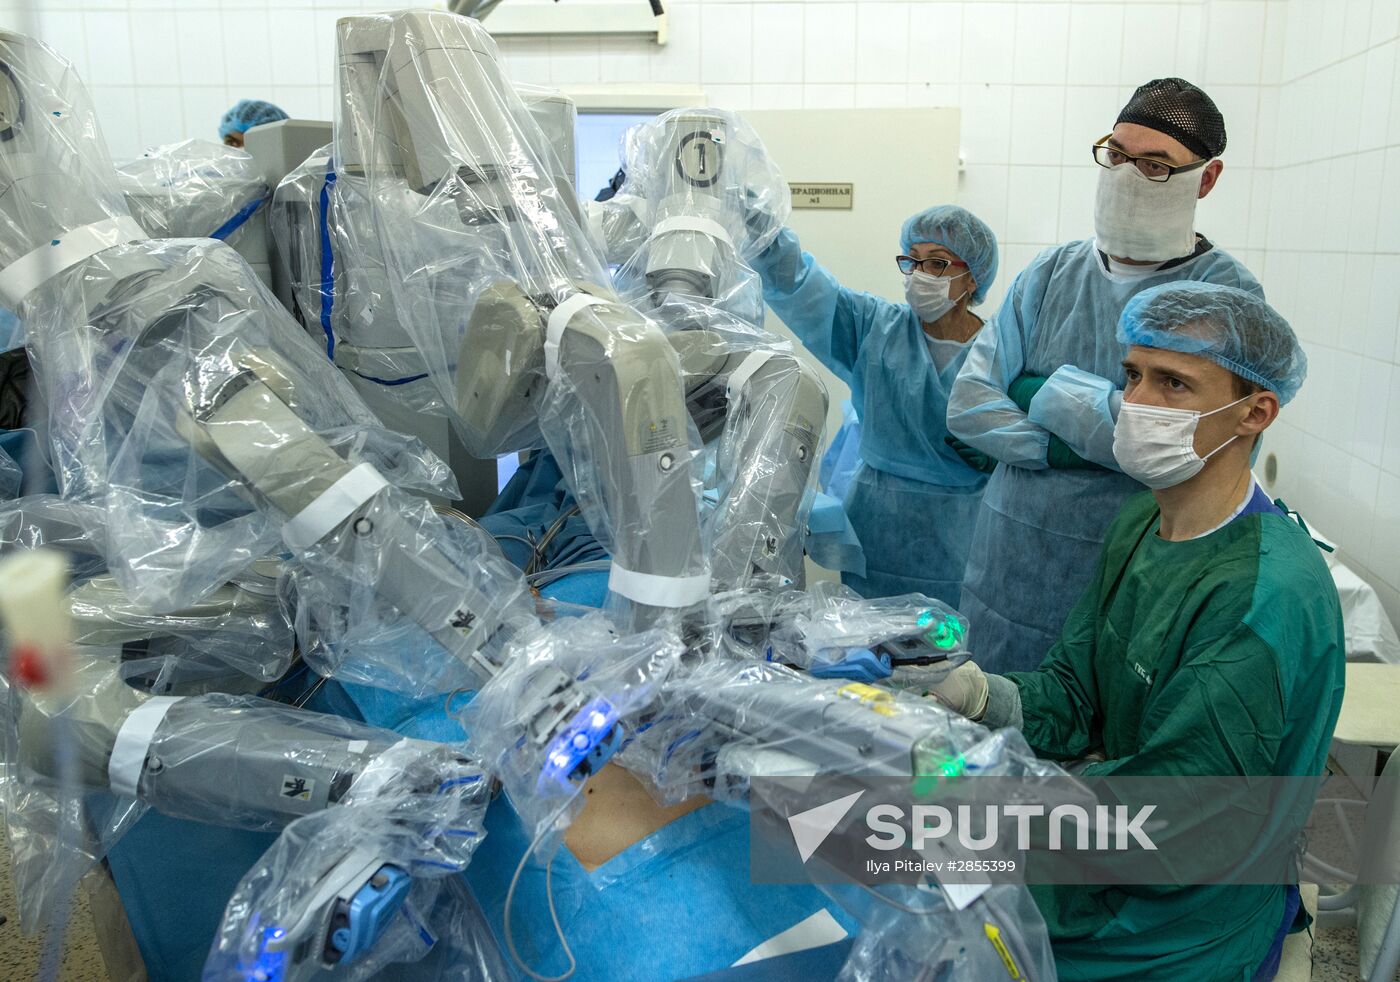 Oncology surgery using da Vinci Surgical System